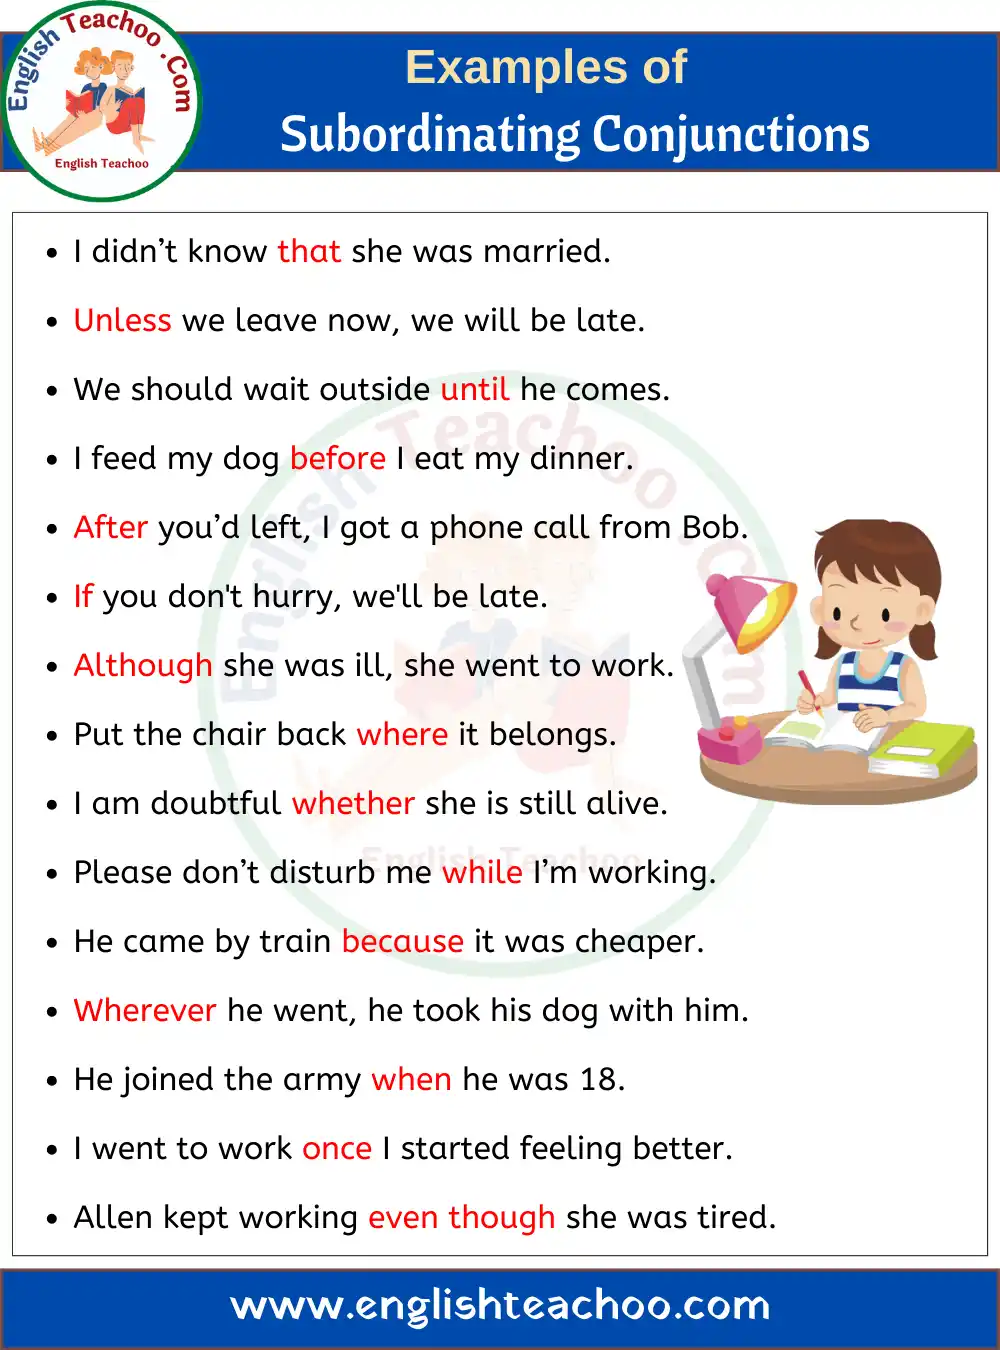 15 Examples of Subordinating Conjunctions 1